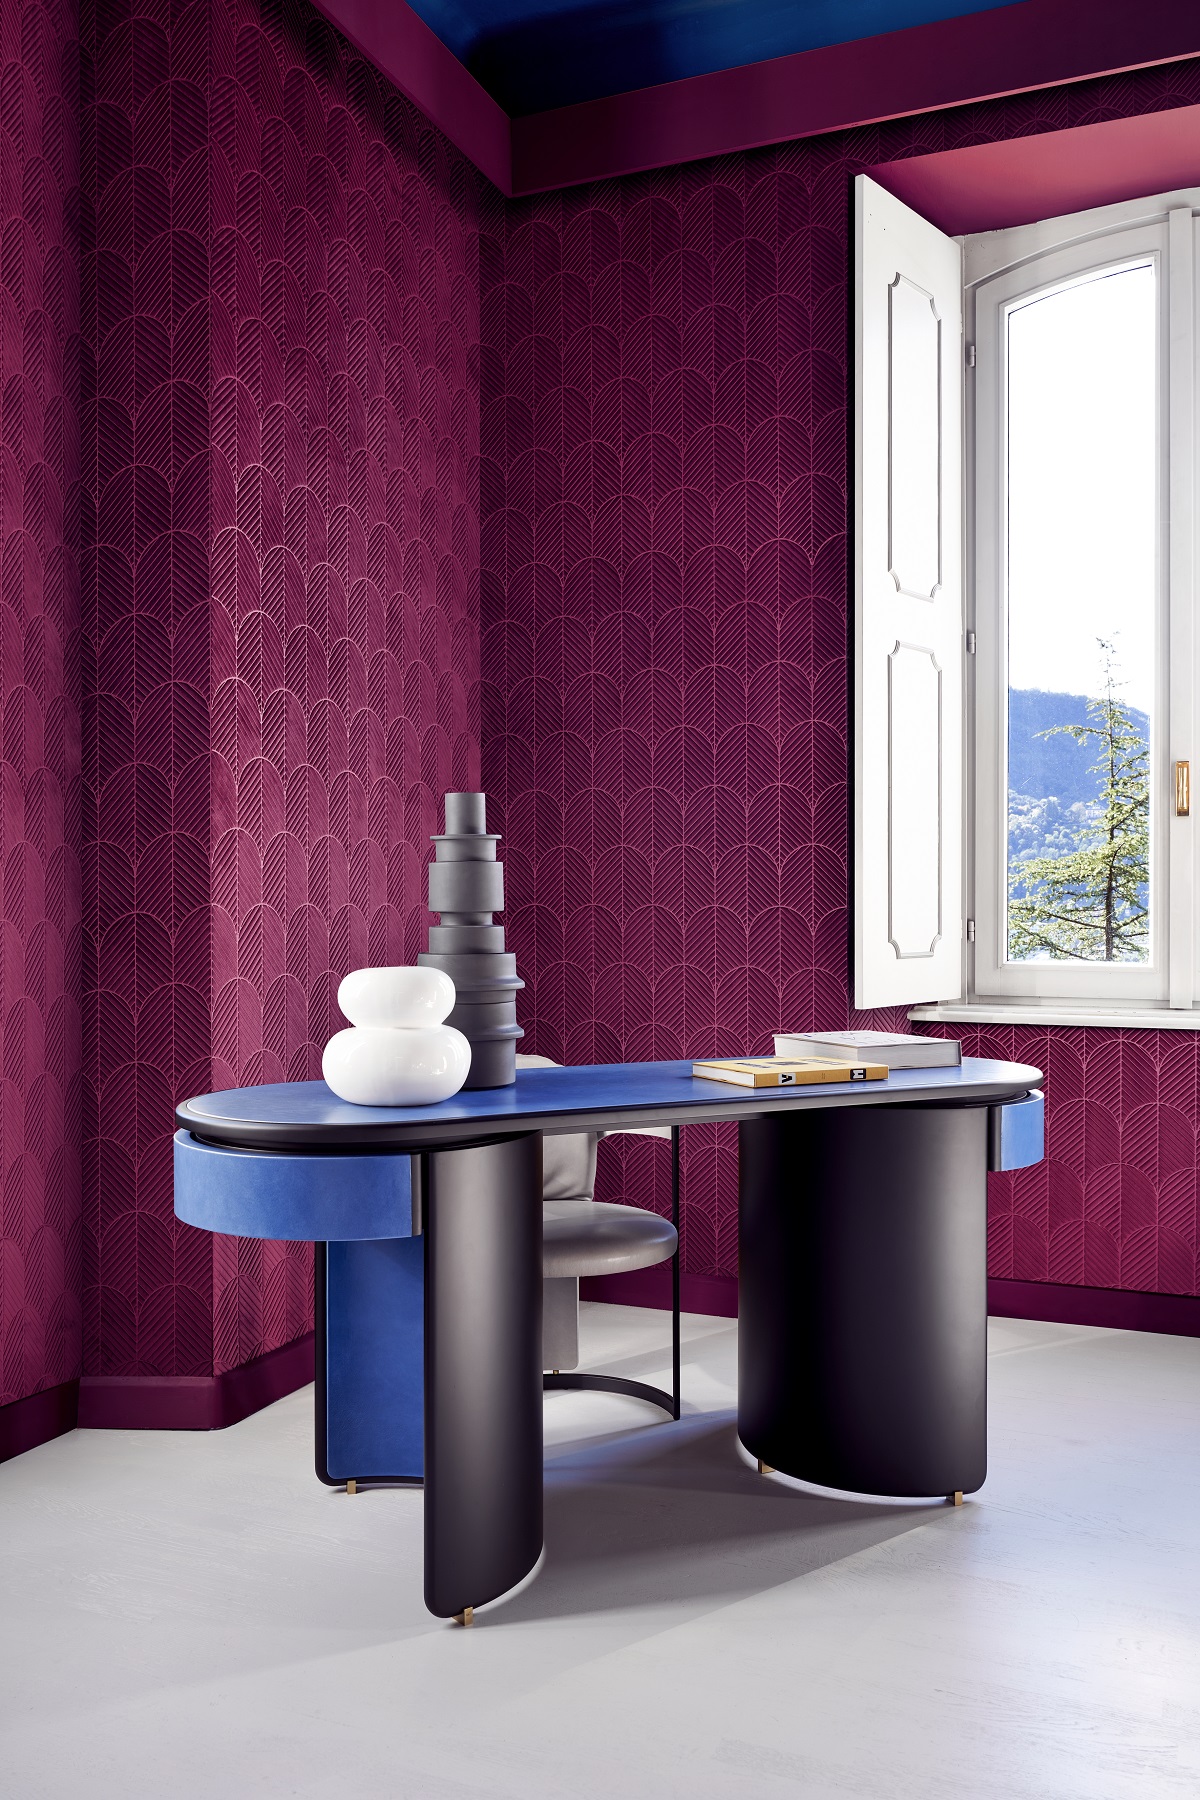 deep purple wallcovering behind statement blue and wood desk